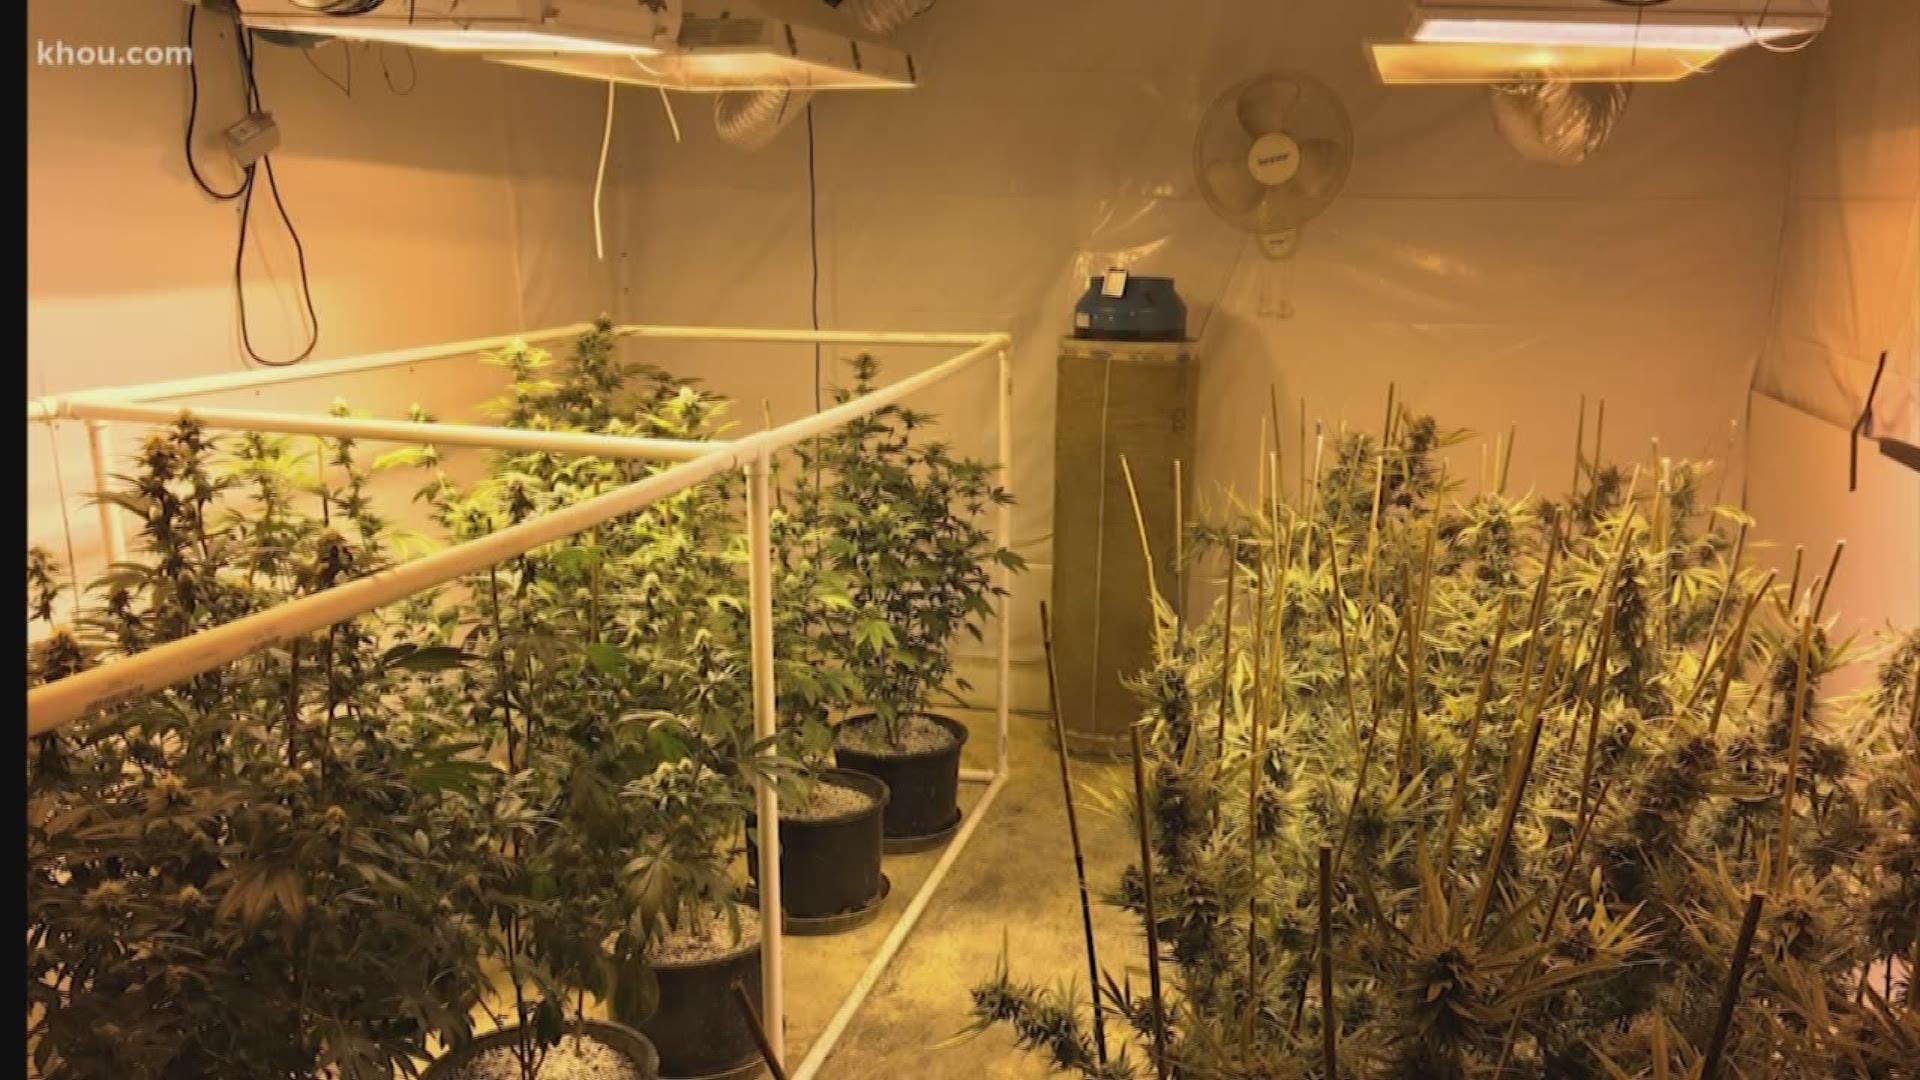 Needville grow house across from high school busted